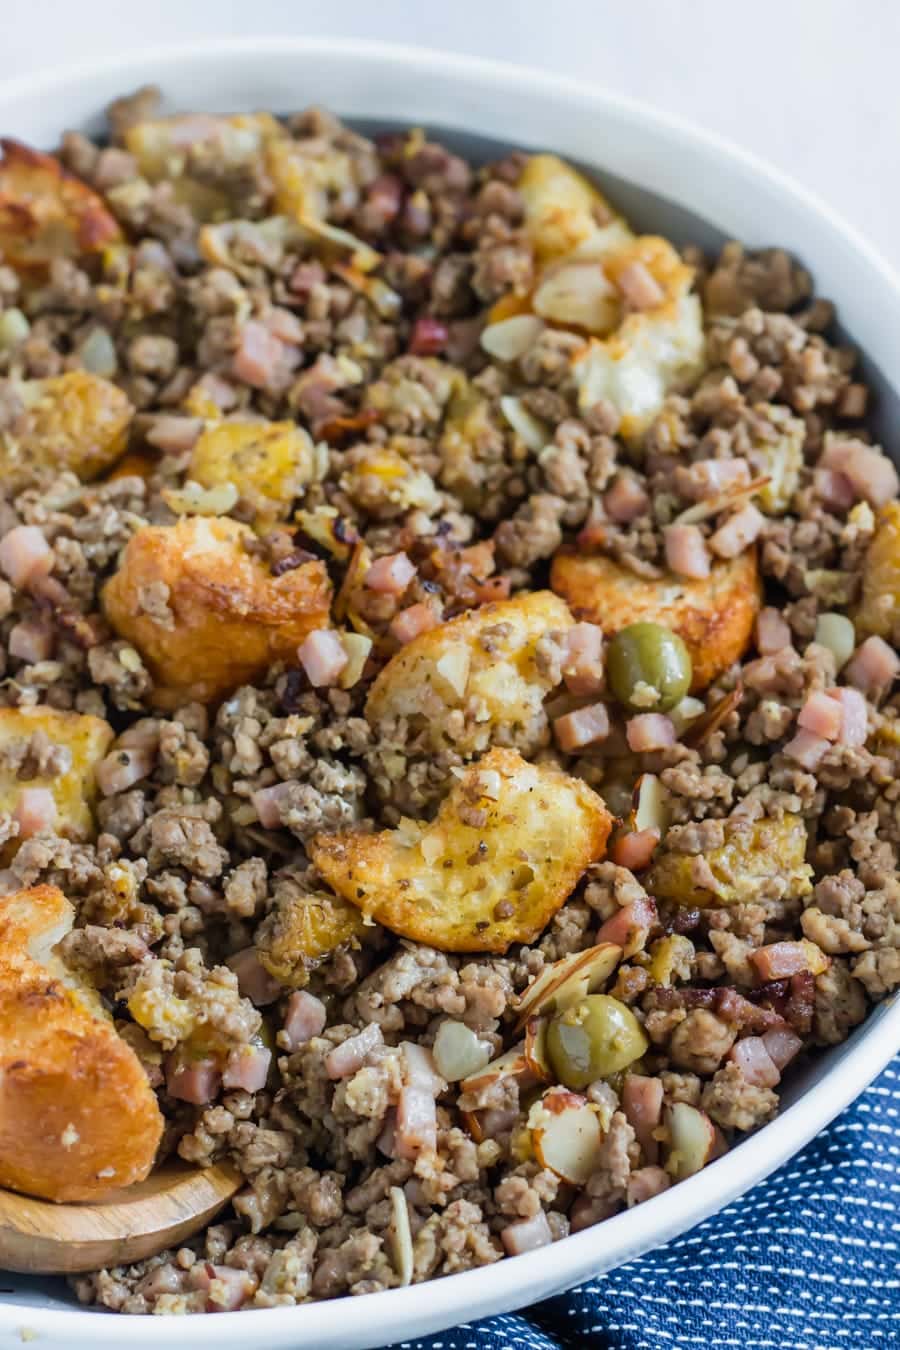 Cubes of toasty French bread mixed with ground beef, ground pork, diced ham, herbs, spices, sliced almonds, chopped olives, and sweet plantains! The BEST stuffing you'll ever try! 